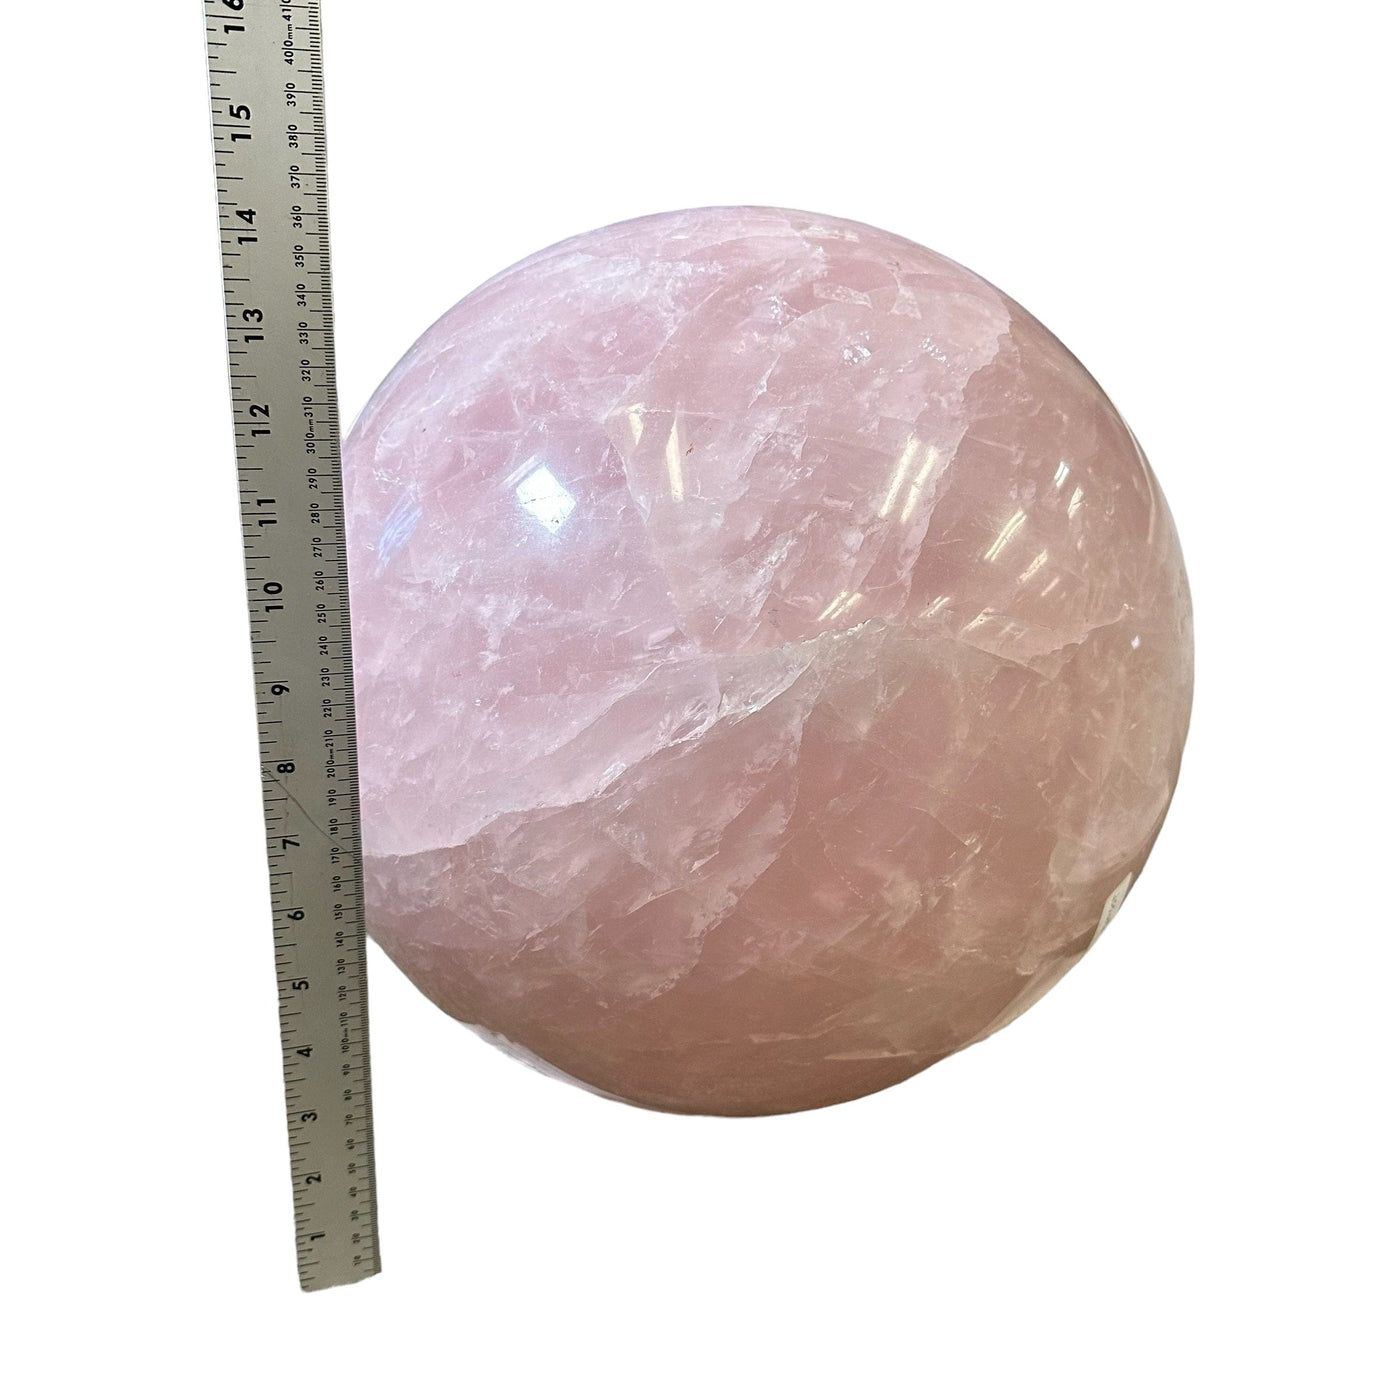 rose quartz sphere next to a ruler for size reference 